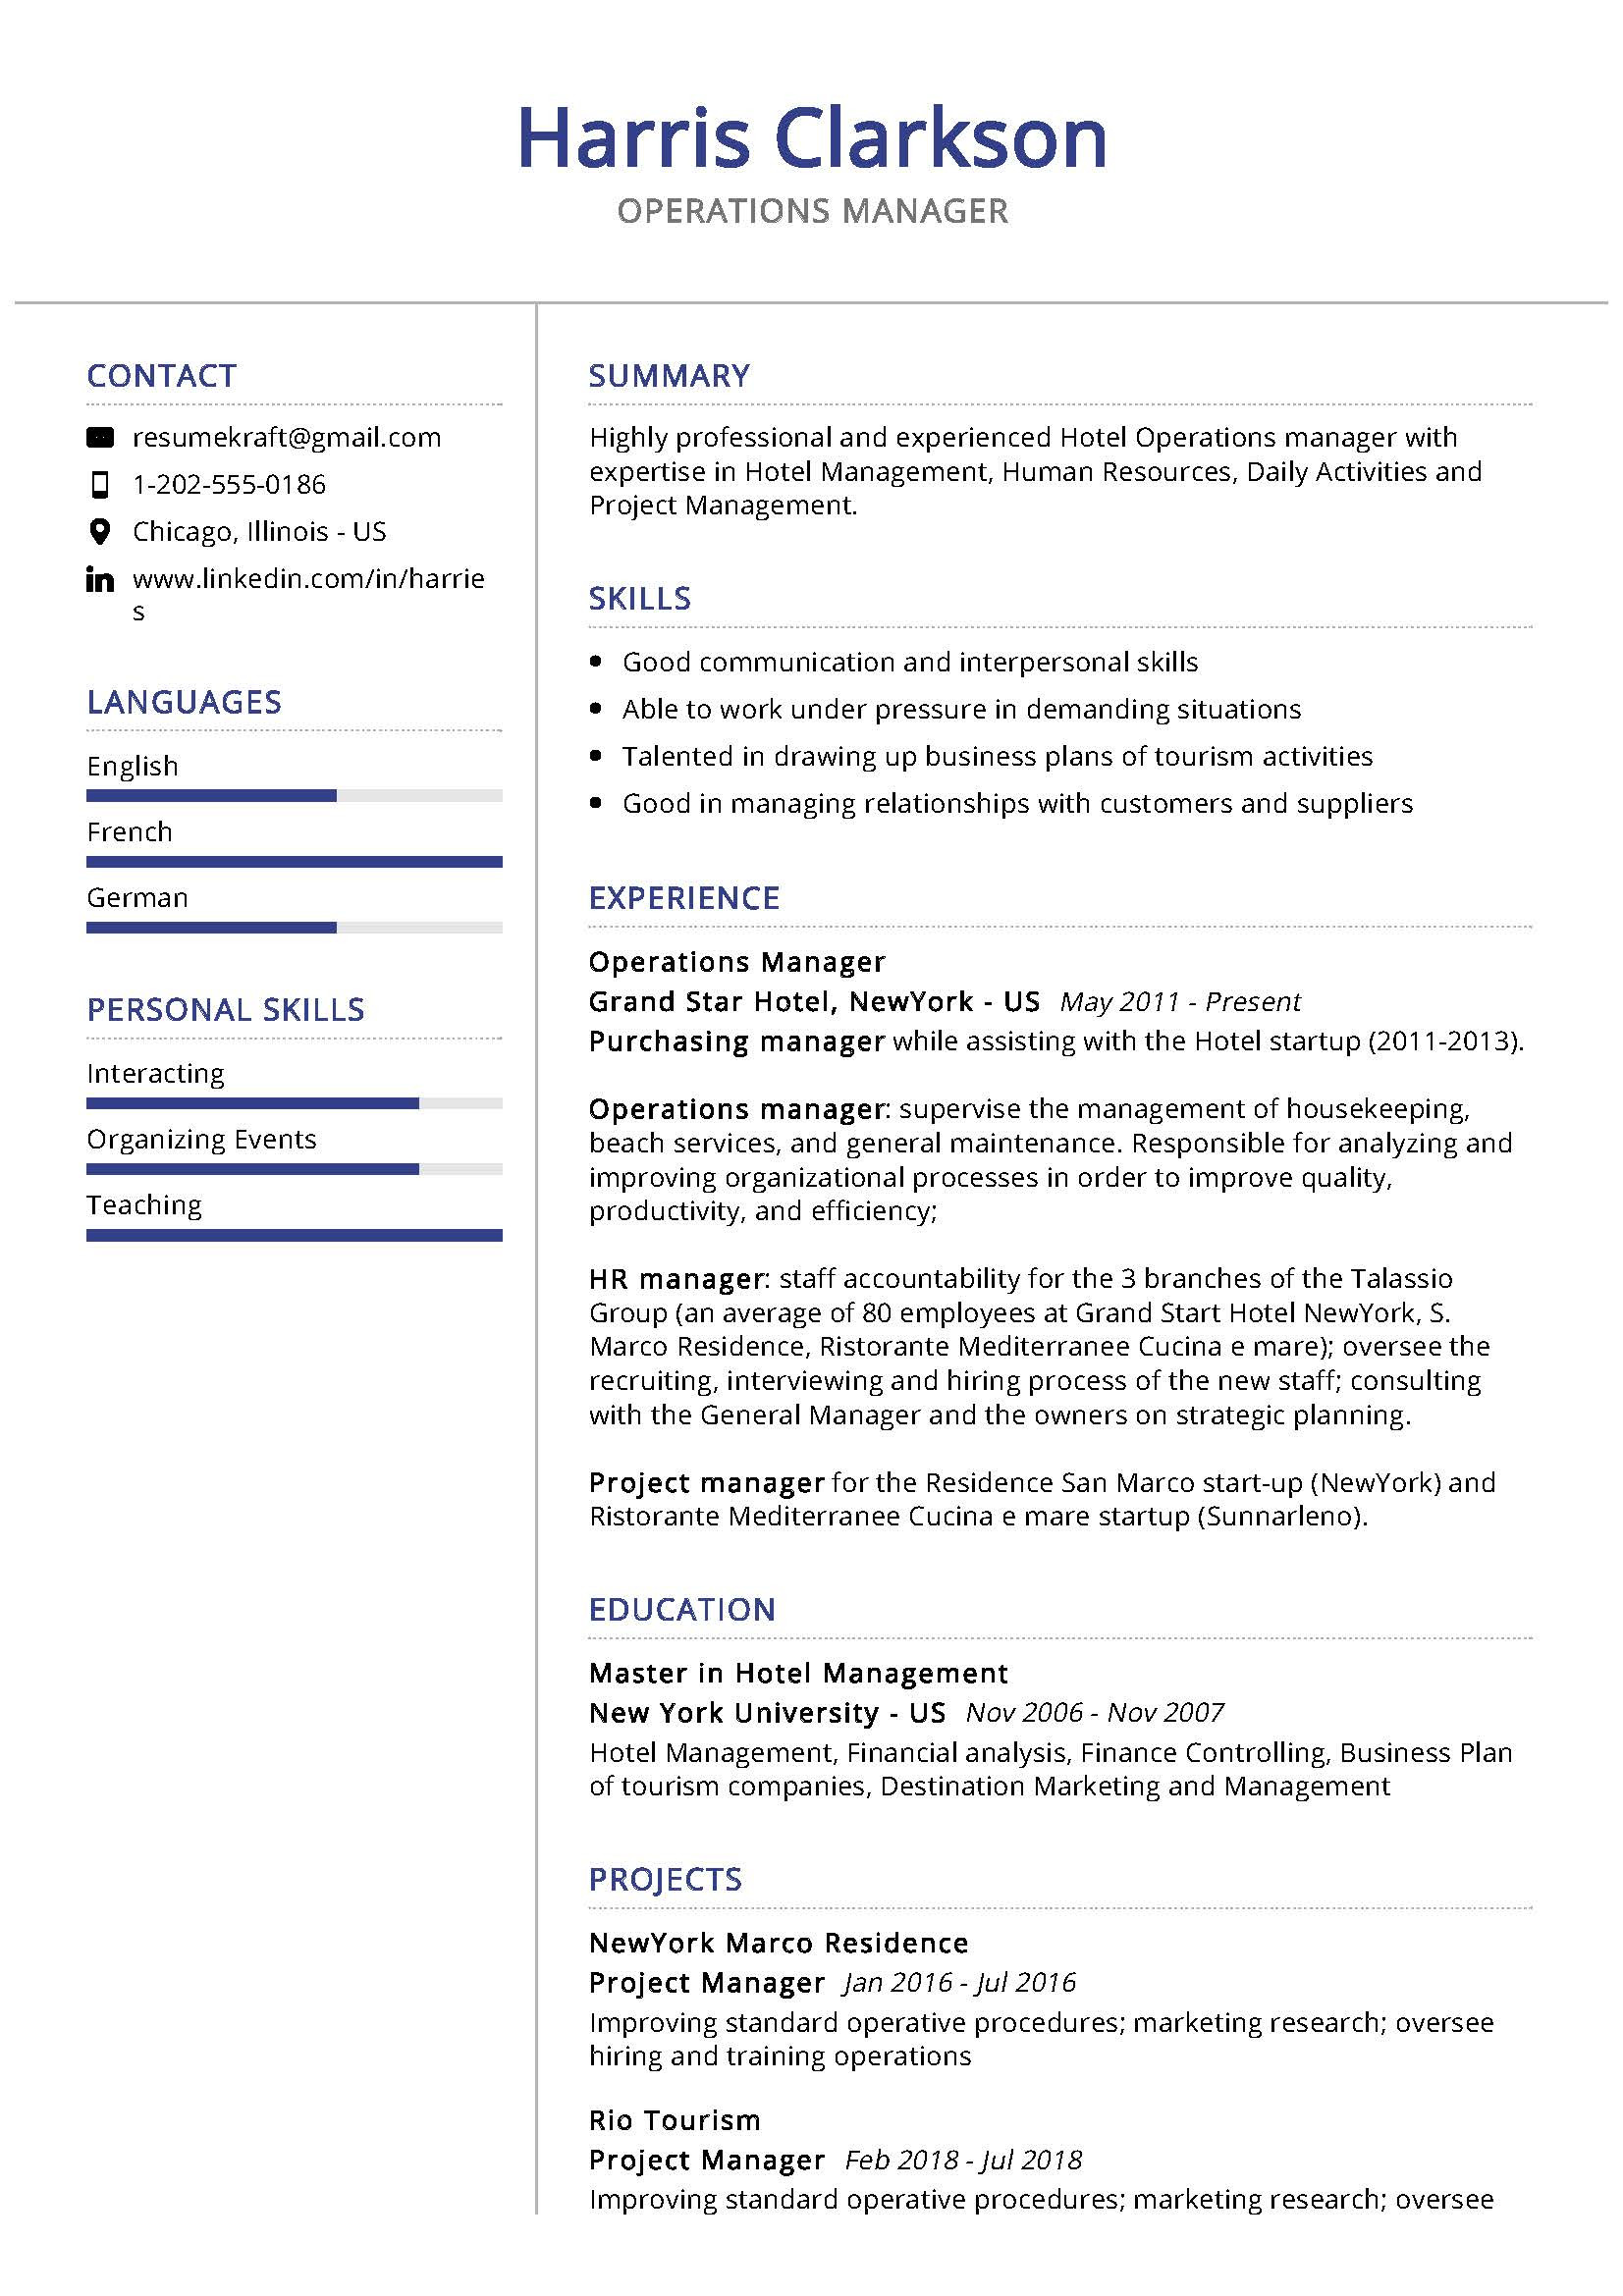 Sample Resume for Retail Operations Manager Operations Manager Resume Sample & Writing Tips 2020 – Resumekraft